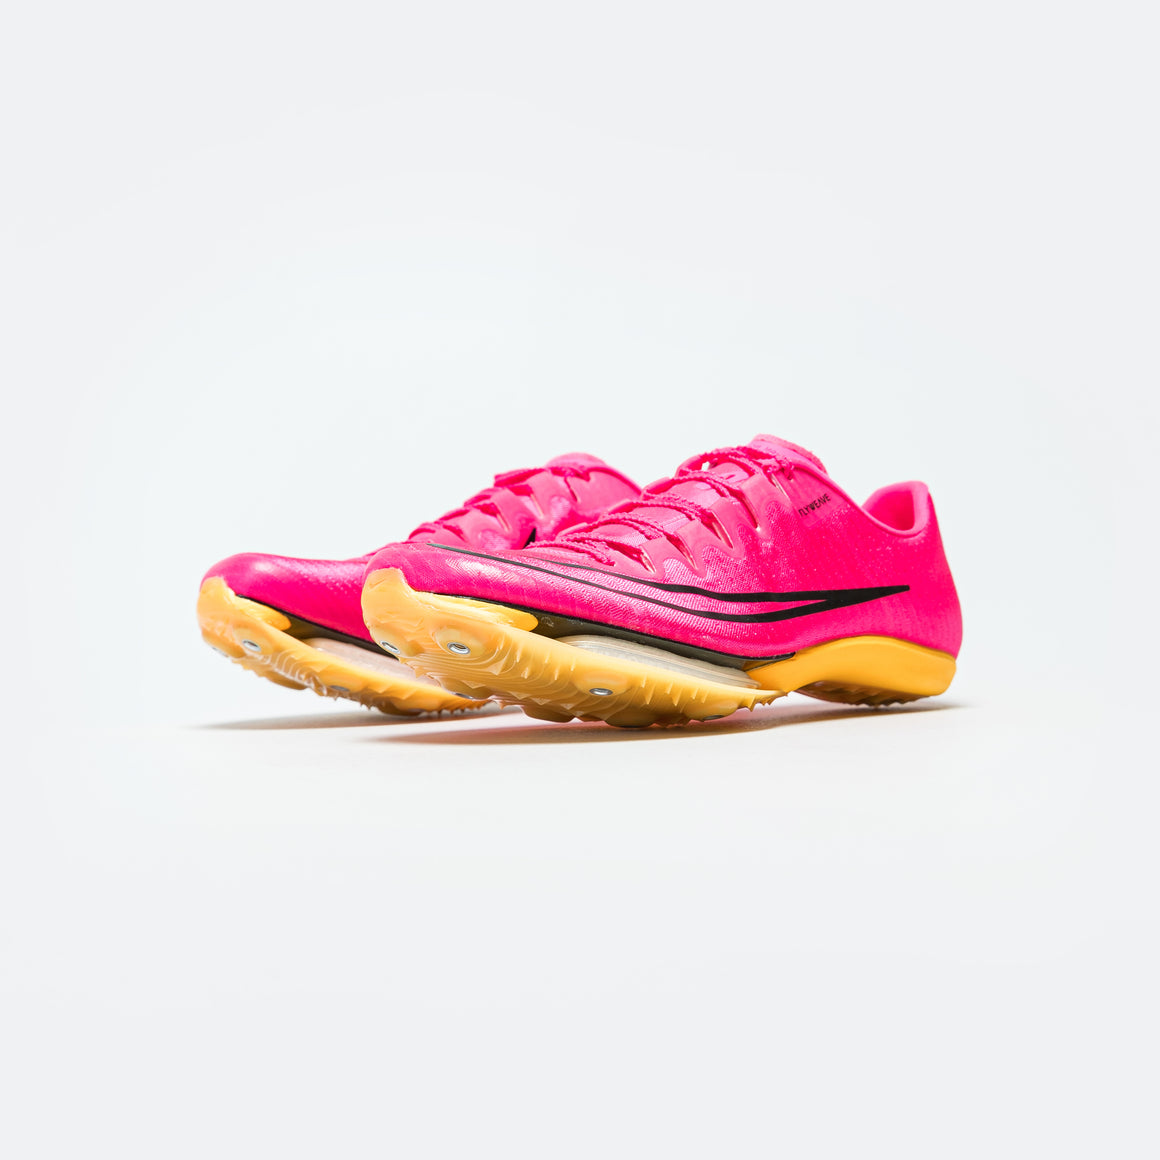 Nike - Air Zoom Maxfly - Hyper Pink/Black-Laser Orange - Up There Athletics